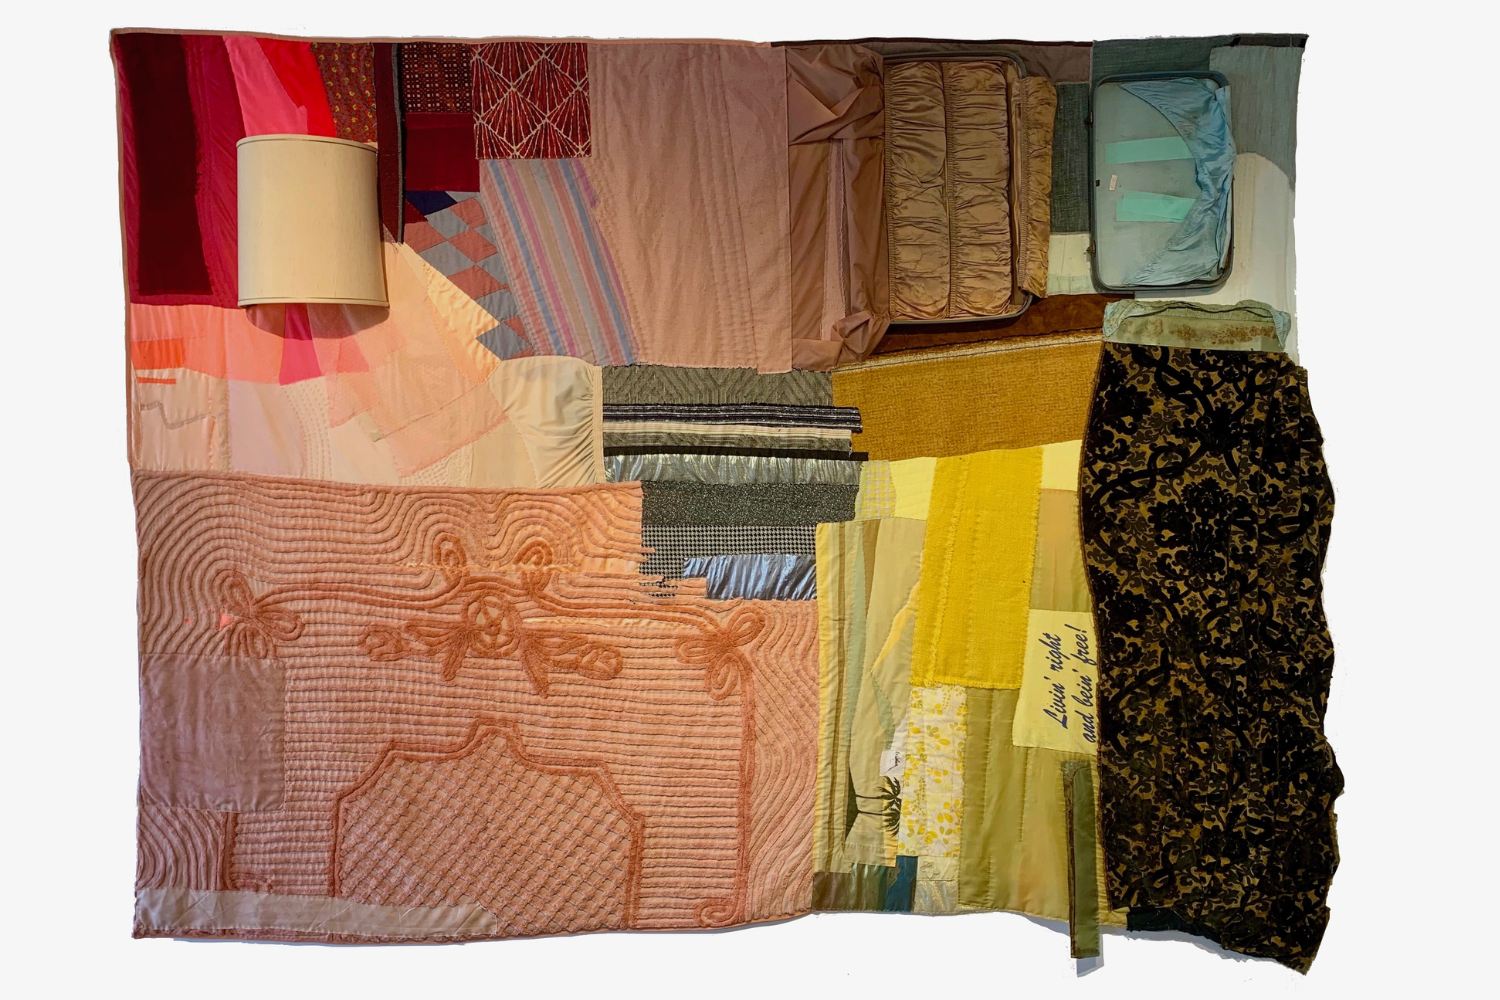 A hand-stitched quilt of many quilted blocks, each featuring items you might find in a room in a home, an orange-and-white bedspread, several strips close together in varying shades of grey to resemble a staticky television screen and more. Along with the blocks there are several 3-D elements, such as a white lampshade, part of which is sewn directly into the piece, and an actual small vintage blue suitcase.